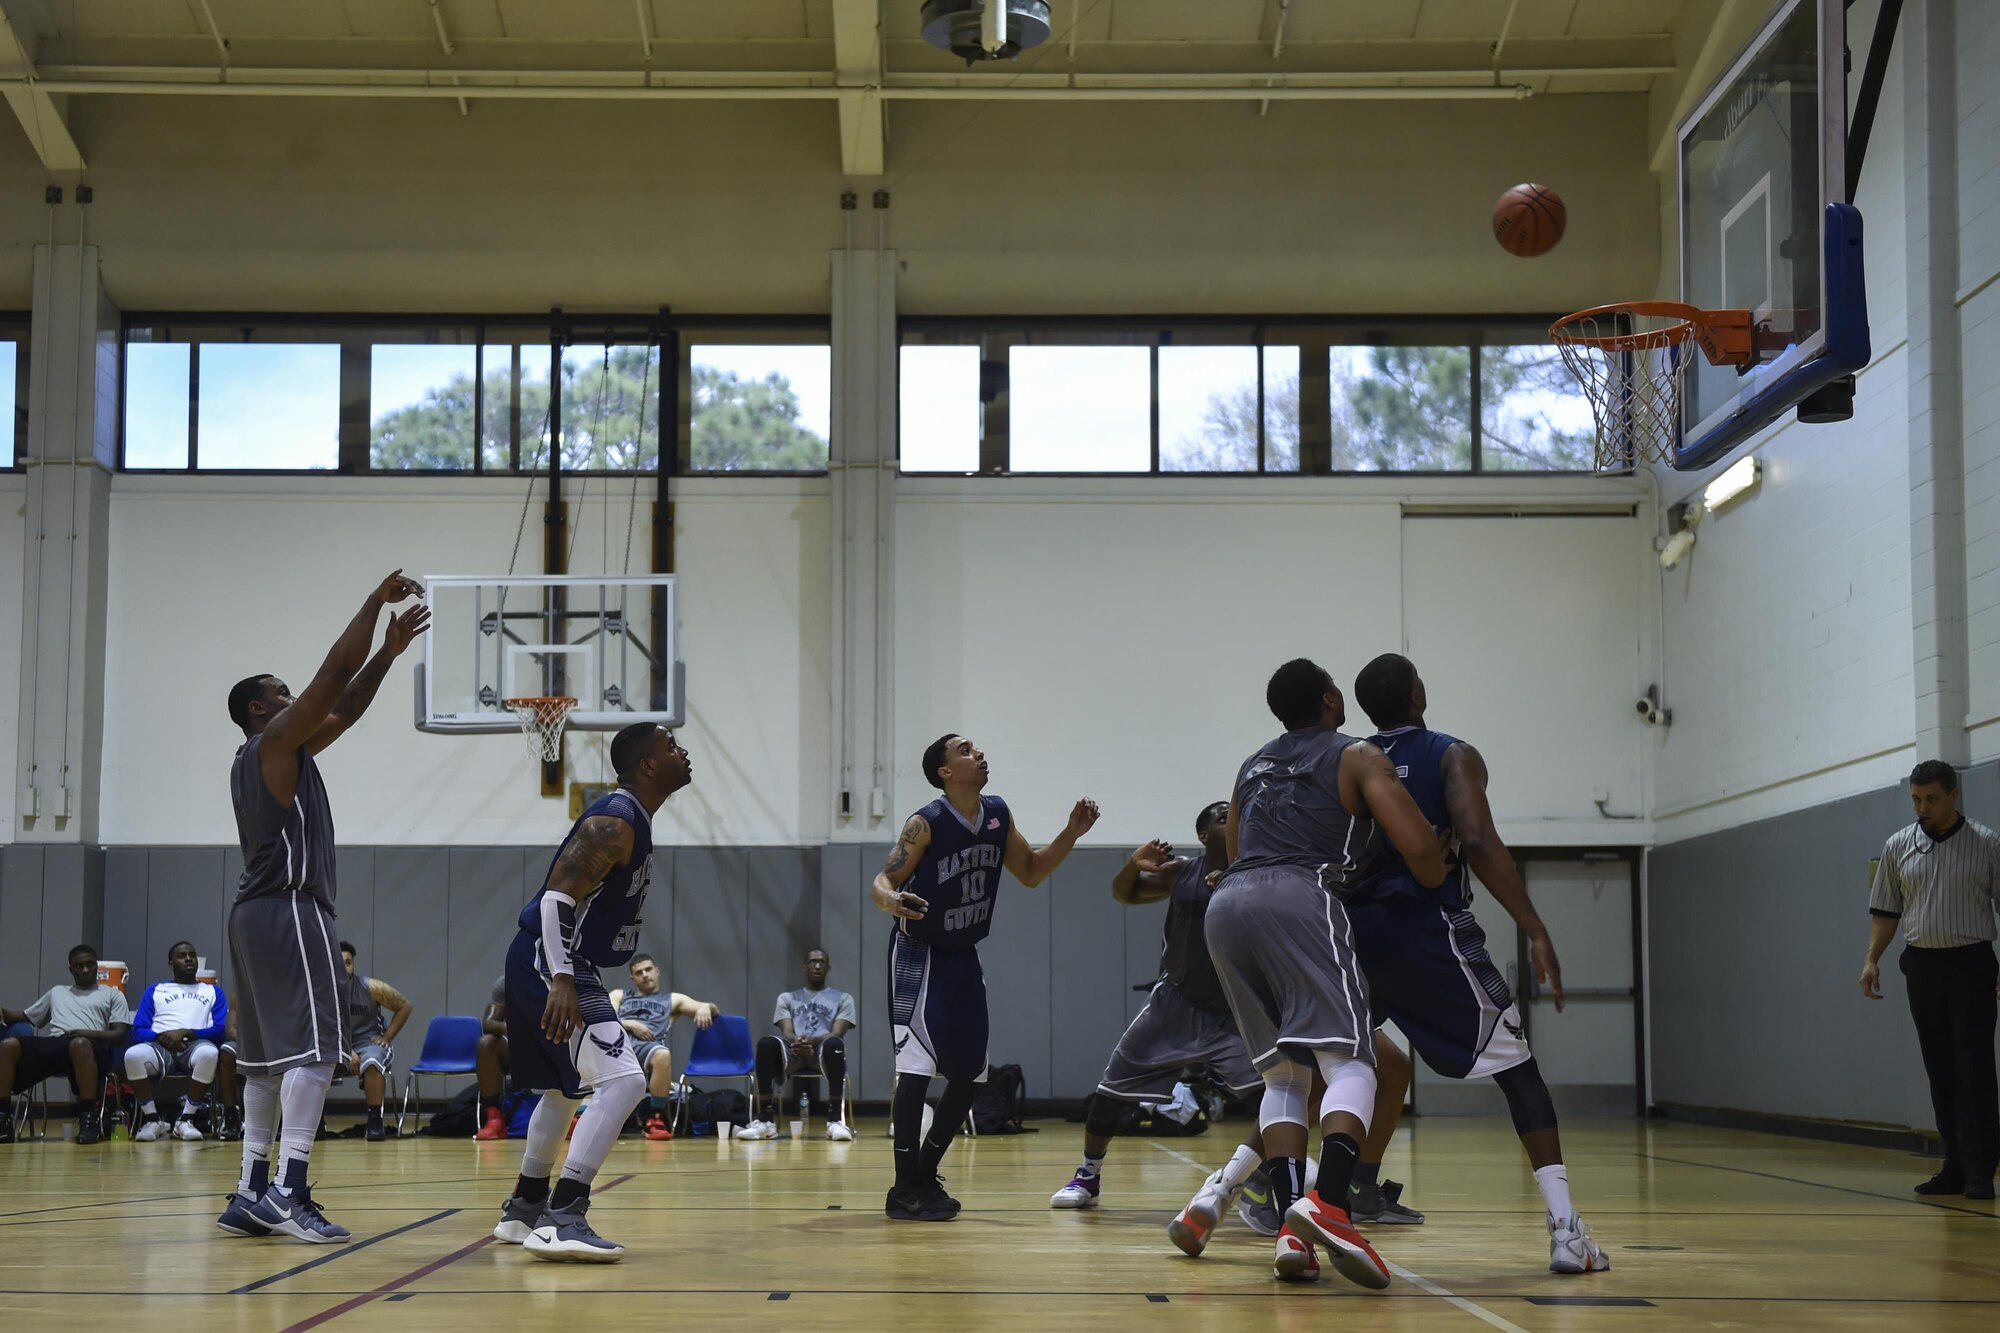 Dionte Clayborn, a member of Hurlburt Field’s basketball team, shoots a free throw during a basketball tournament at the Aderholt Fitness Center on Hurlburt Field, Fla., Jan. 15, 2017. Eight Air Force teams from nearby bases competed in the two-day, double-elimination tournament. Hurlburt Field finished second in the championship game against Maxwell Air Force Base in the 2nd annual Martin Luther King Jr. Day tournament. (U.S. Air Force photo by Airman 1st Class Joseph Pick)